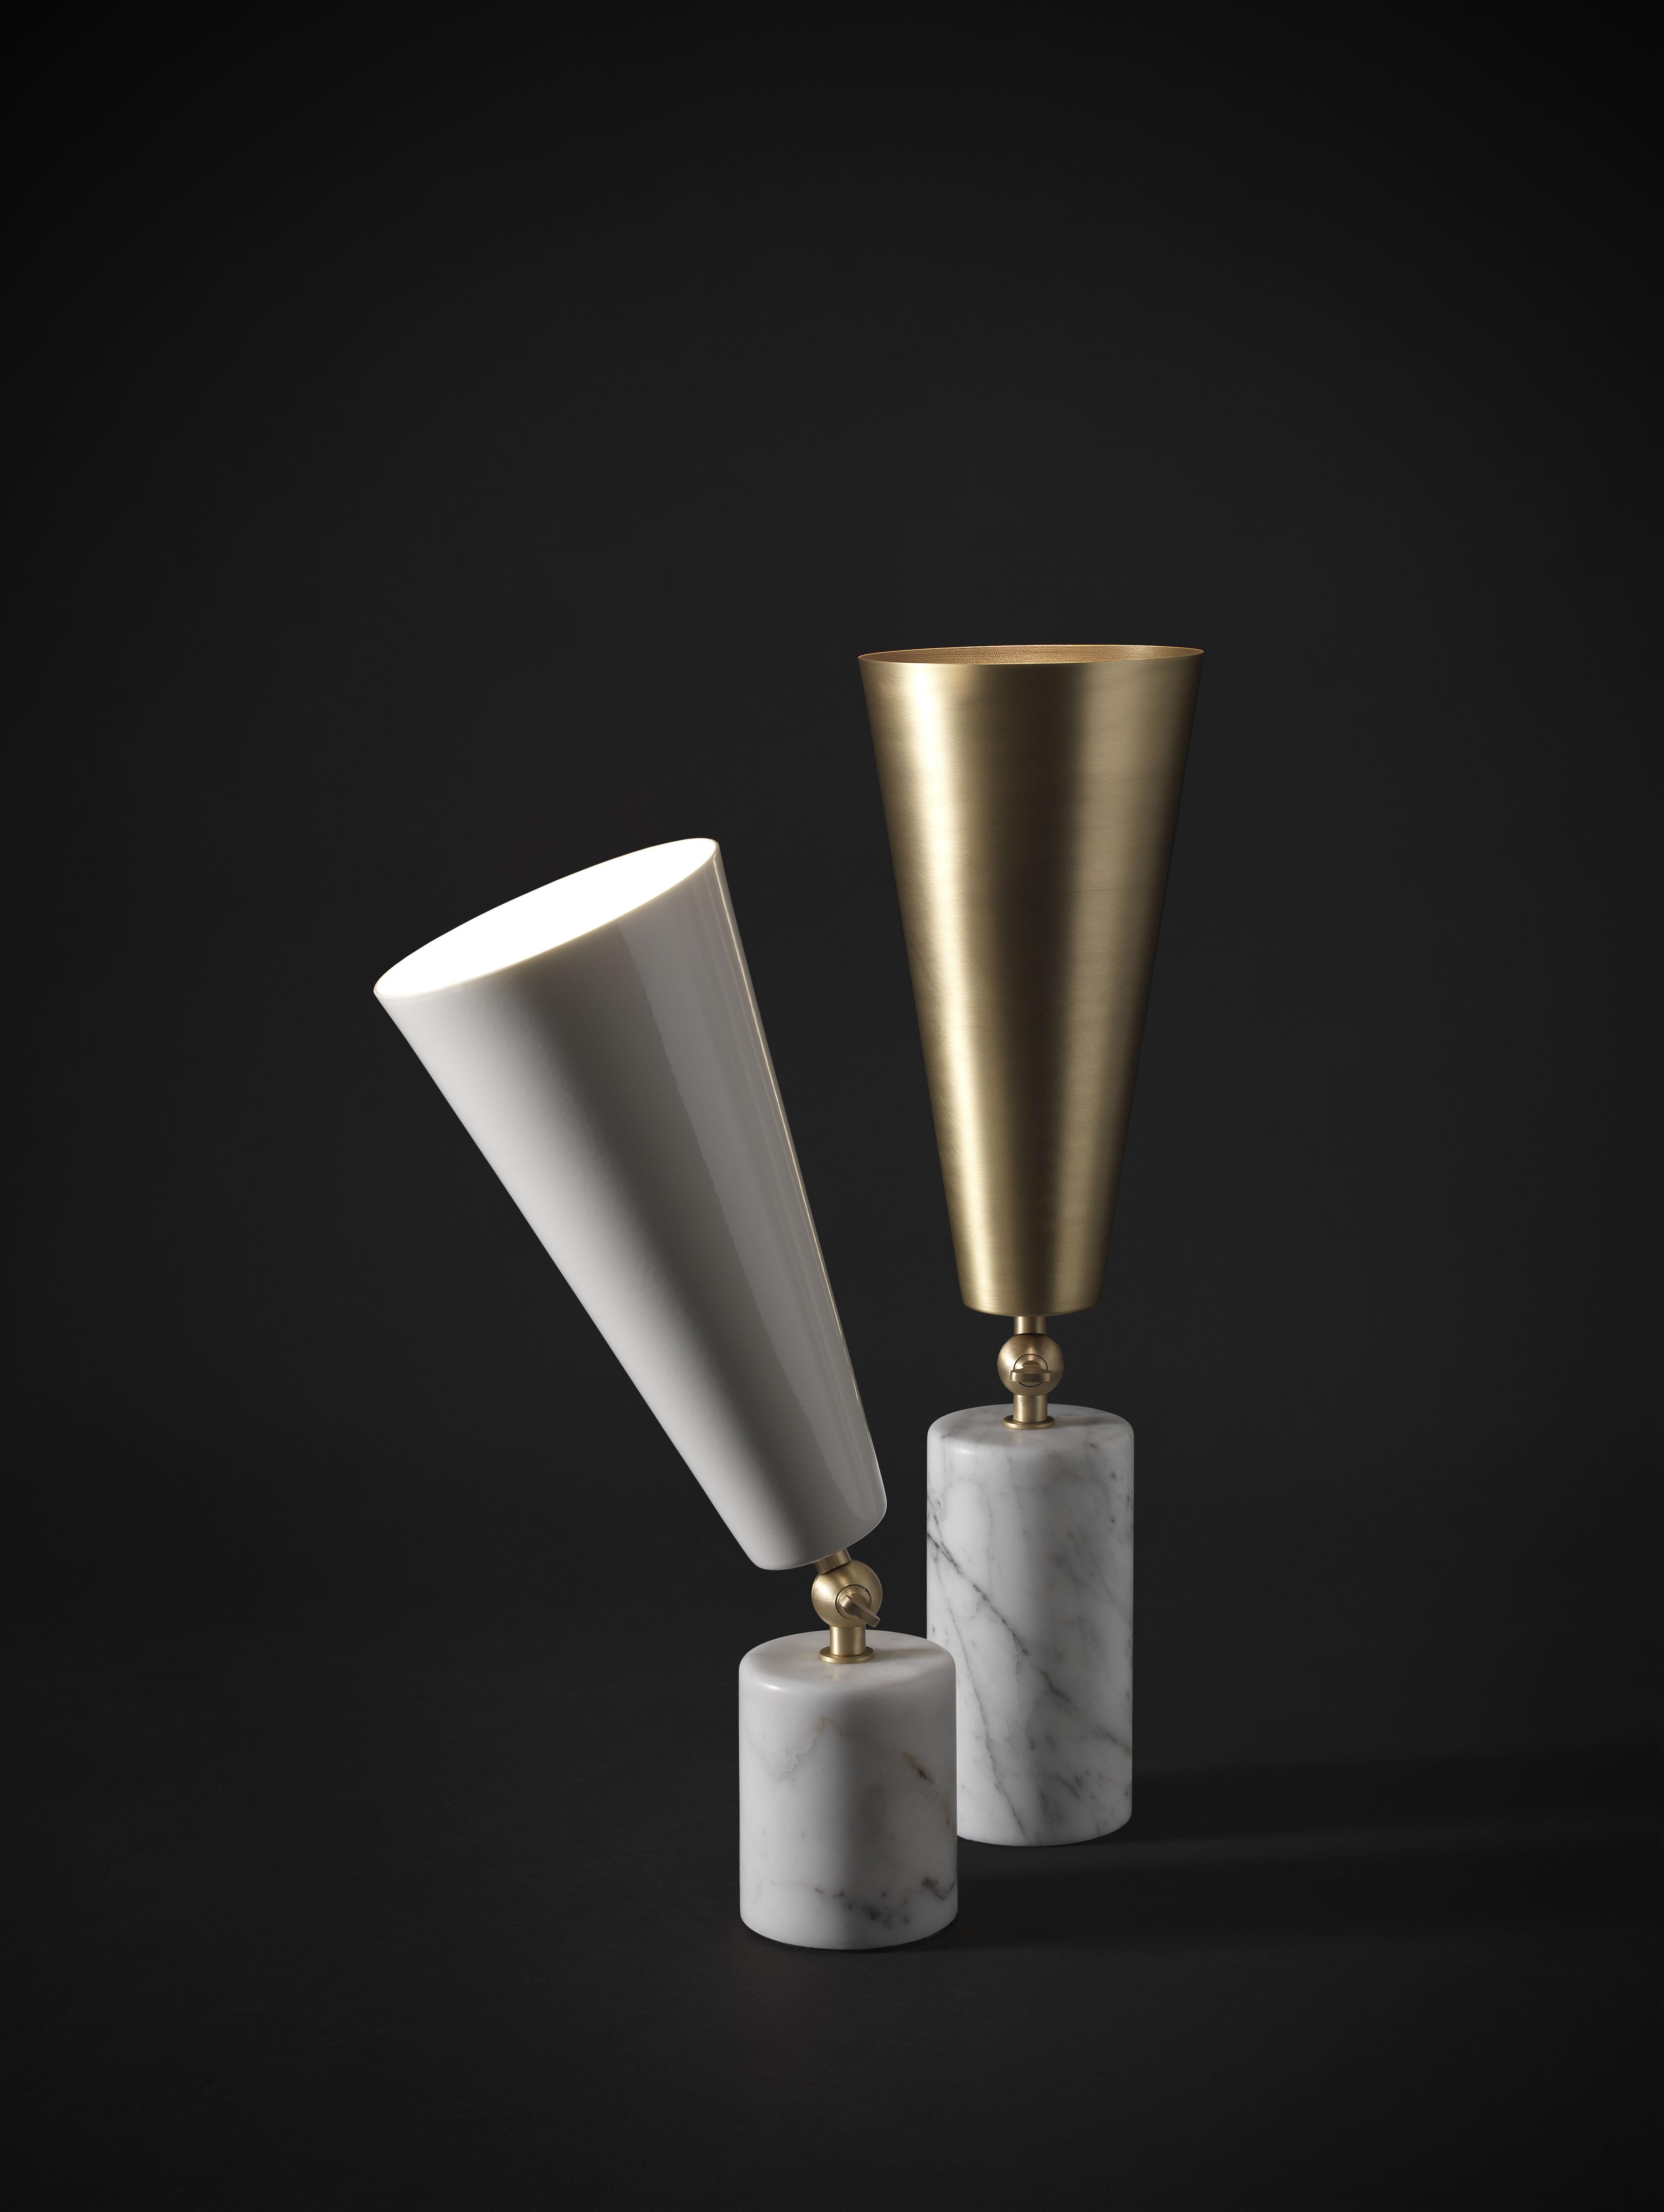 Tato Italia 'Vox' Table Lamp in White Carrara Marble, Satin Brass, and White.

Originally designed by Lorenza Bozzoli in 1969. 

Price is per item. Available to order in unlimited quantities. Available in 15.7